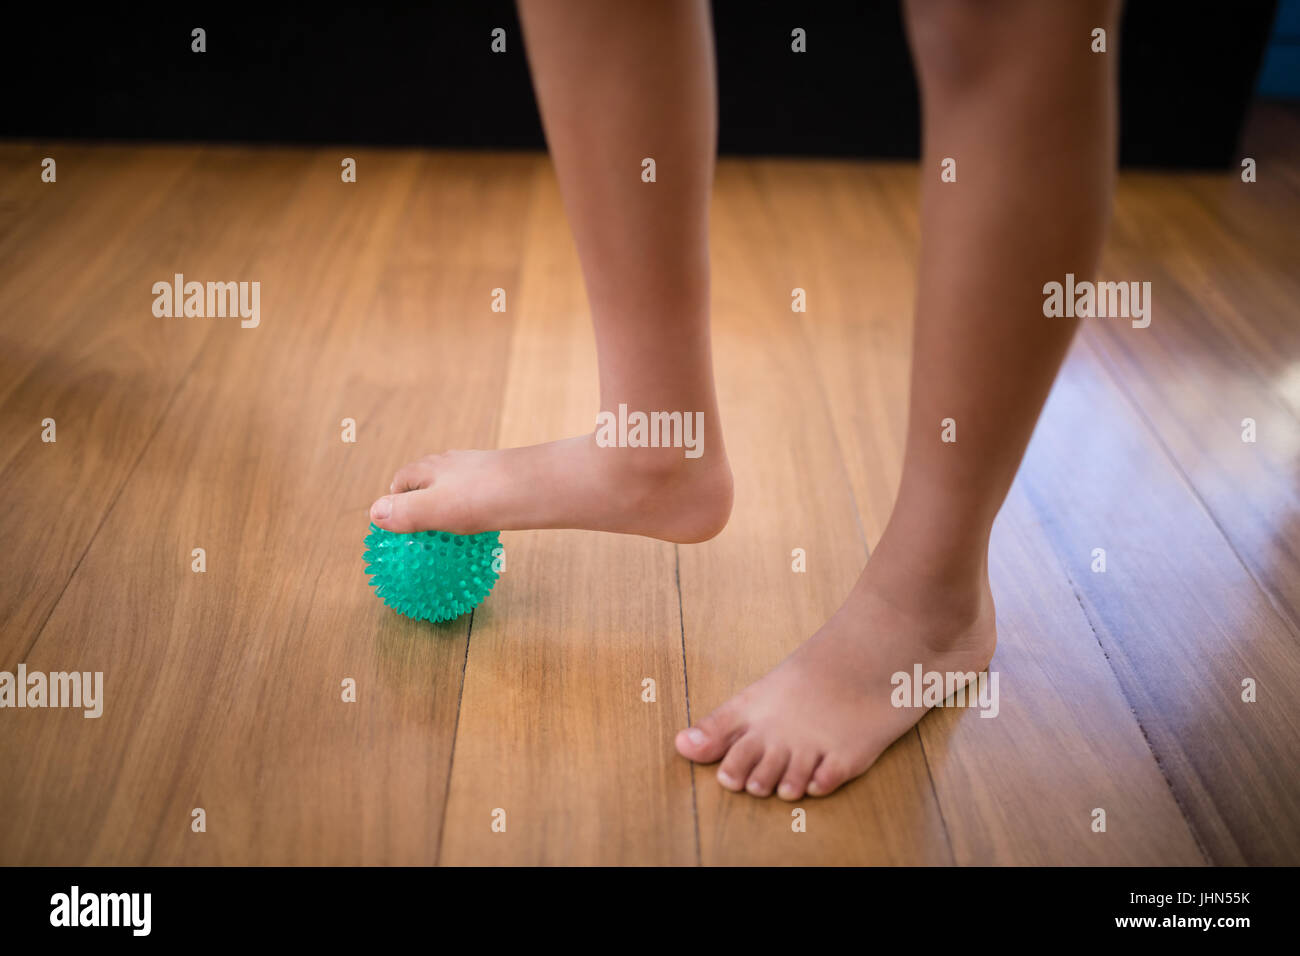 Low section of boy standing while stepping on stress ball at hospital ward Stock Photo